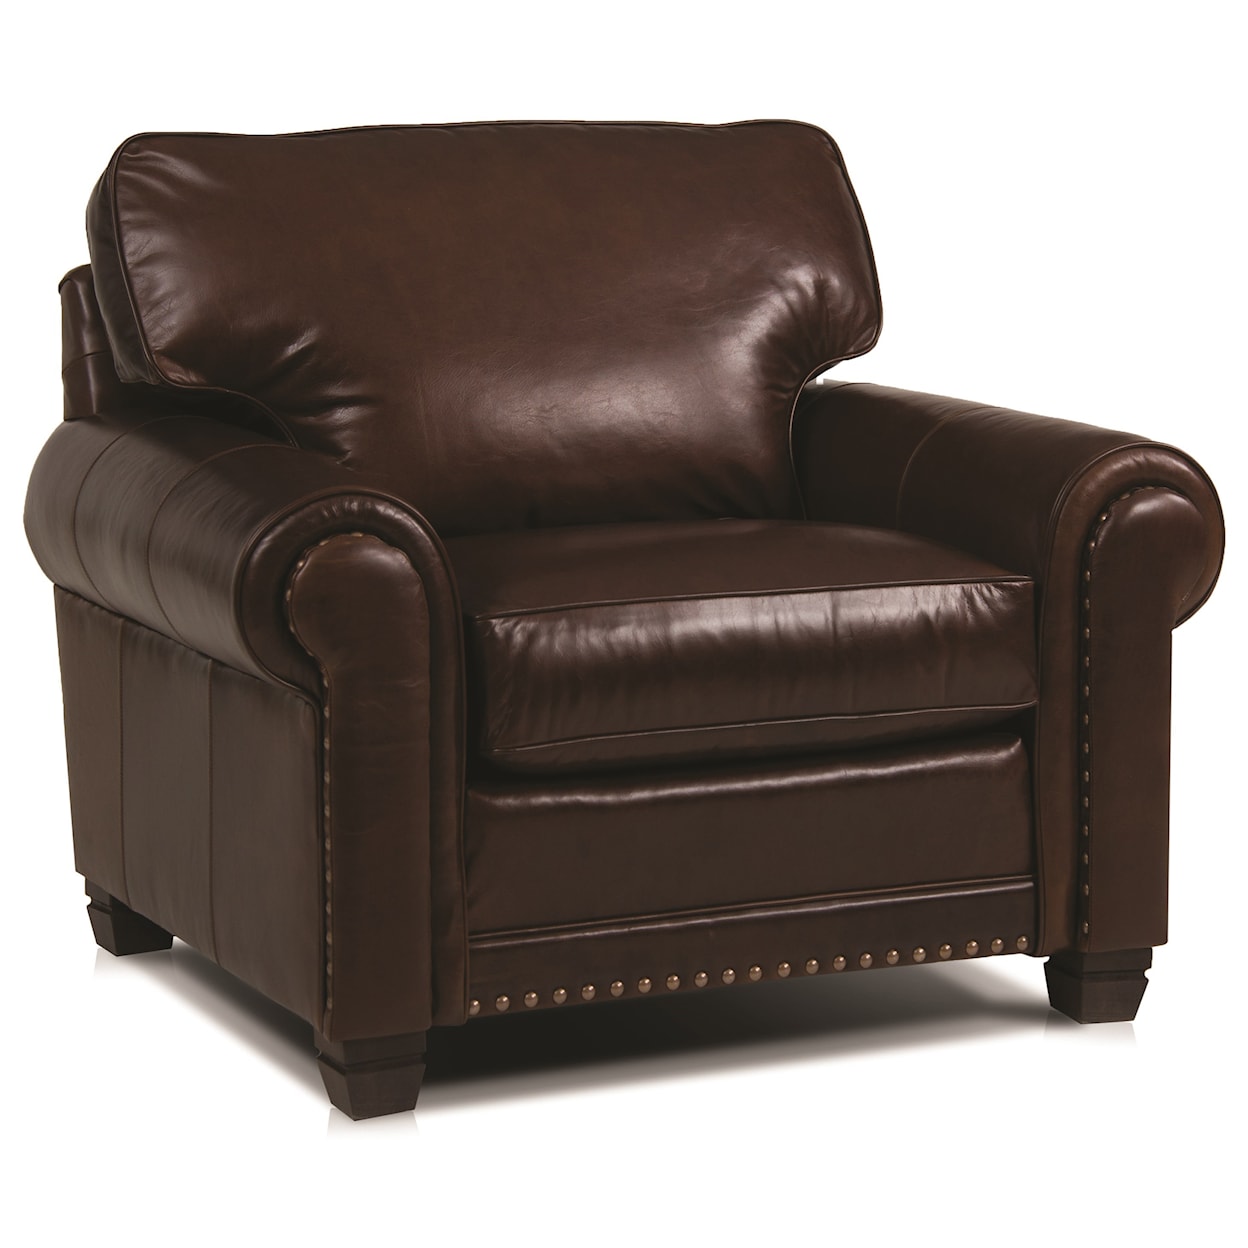 Smith Brothers 393 Traditional Stationary Chair